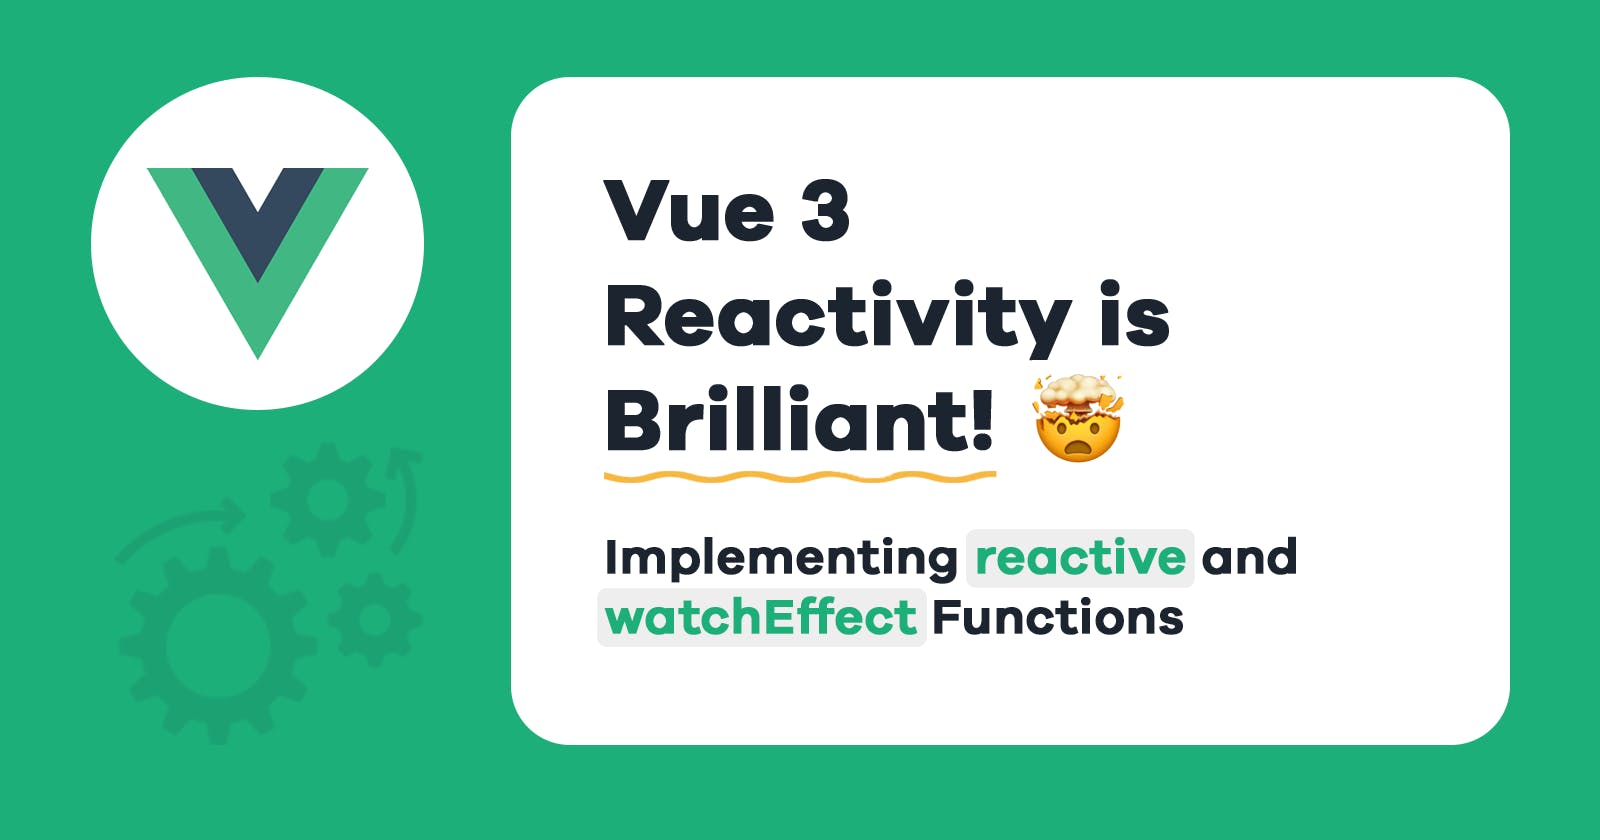 Vue 3 Reactivity System Is Brilliant! Here’s How It Works - 
Part 2: reactive and watchEffect Functions